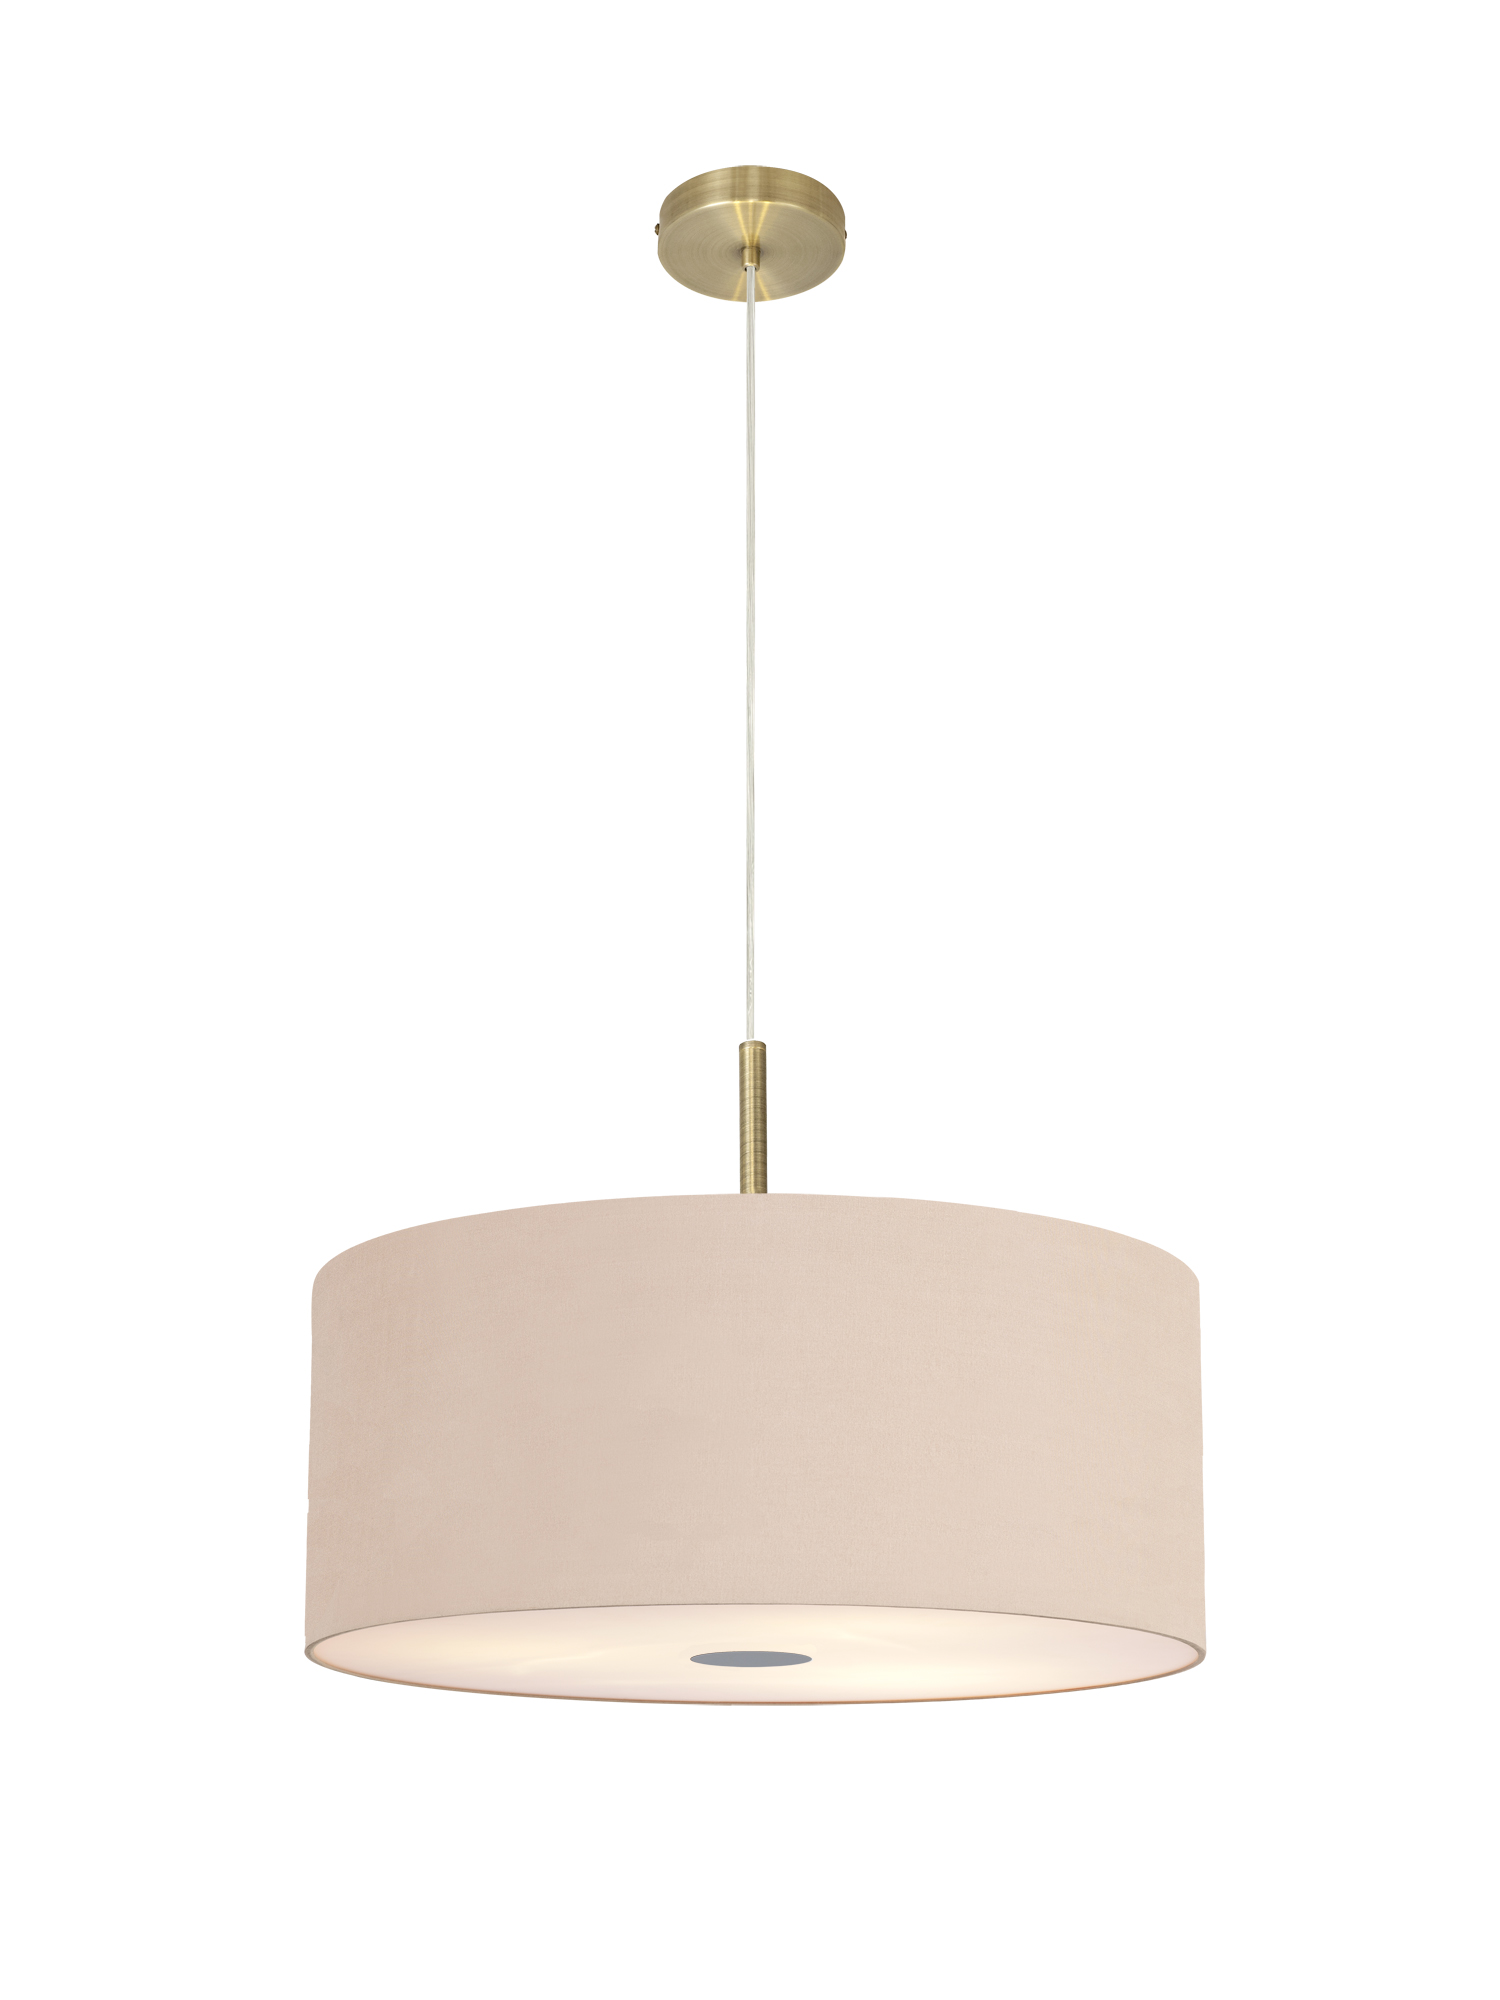 Baymont 60cm 5 Light Pendant Antique Brass; Antique Gold/Ruby; Frosted Diffuser DK0522  Deco Baymont AB AG